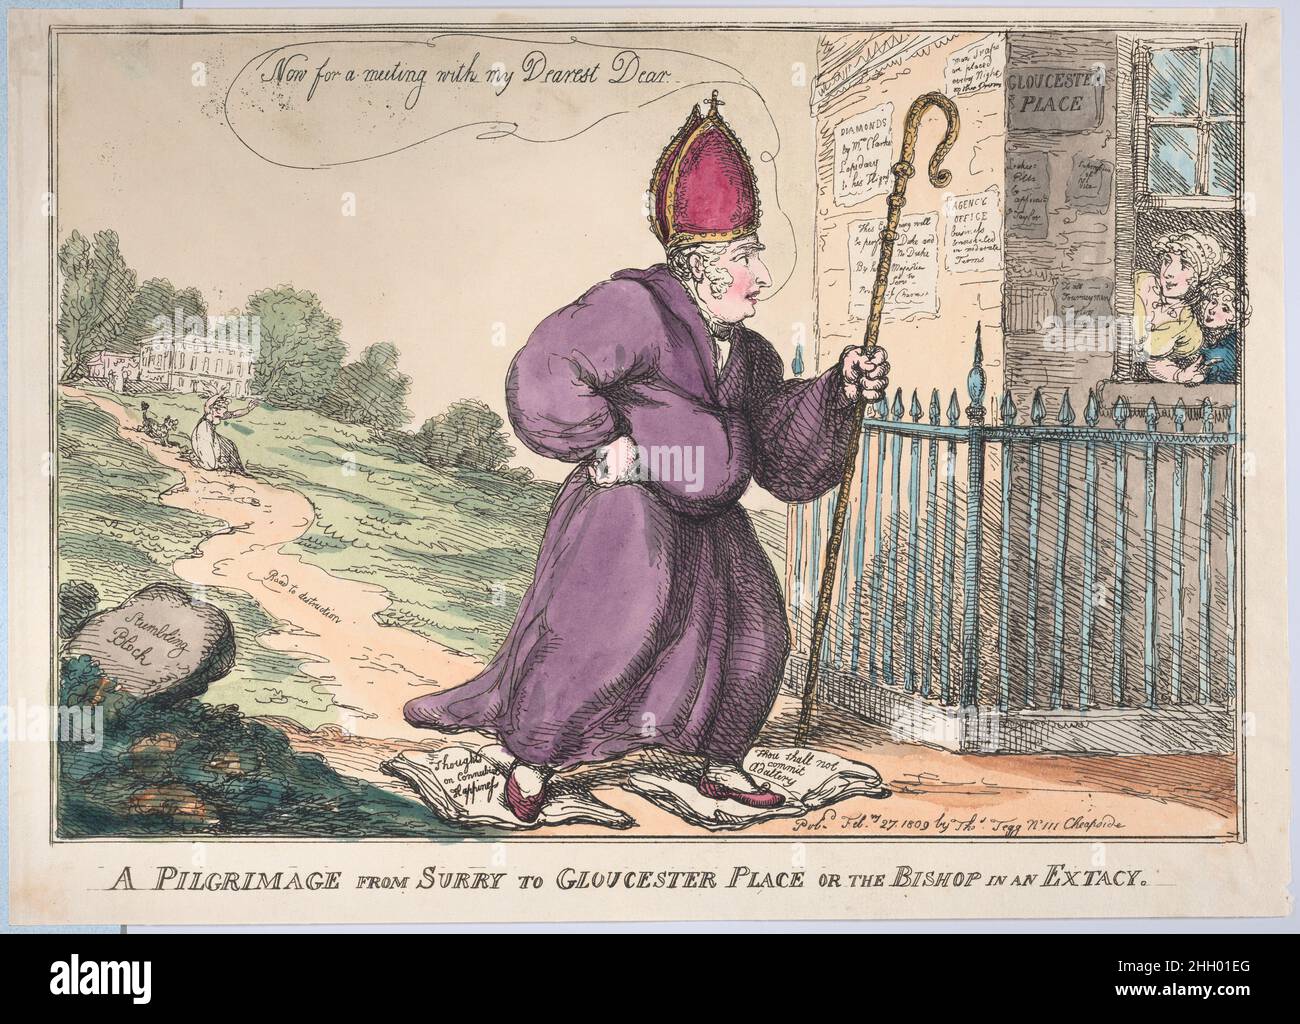 A Pilgrimage from Surry to Gloucester Place or the Bishop is an Extacty February 27, 1809 Thomas Rowlandson The Duke of York in pilgrim’s robe, rushing from his country home at Oatlands, Surrey, to Mrs Clarke and Miss Taylor in Gloucester Place, Chelsea. A Pilgrimage from Surry to Gloucester Place or the Bishop is an Extacty. Thomas Rowlandson (British, London 1757–1827 London). February 27, 1809. Hand-colored etching. Thomas Tegg (British, 1776–1846). Prints Stock Photo